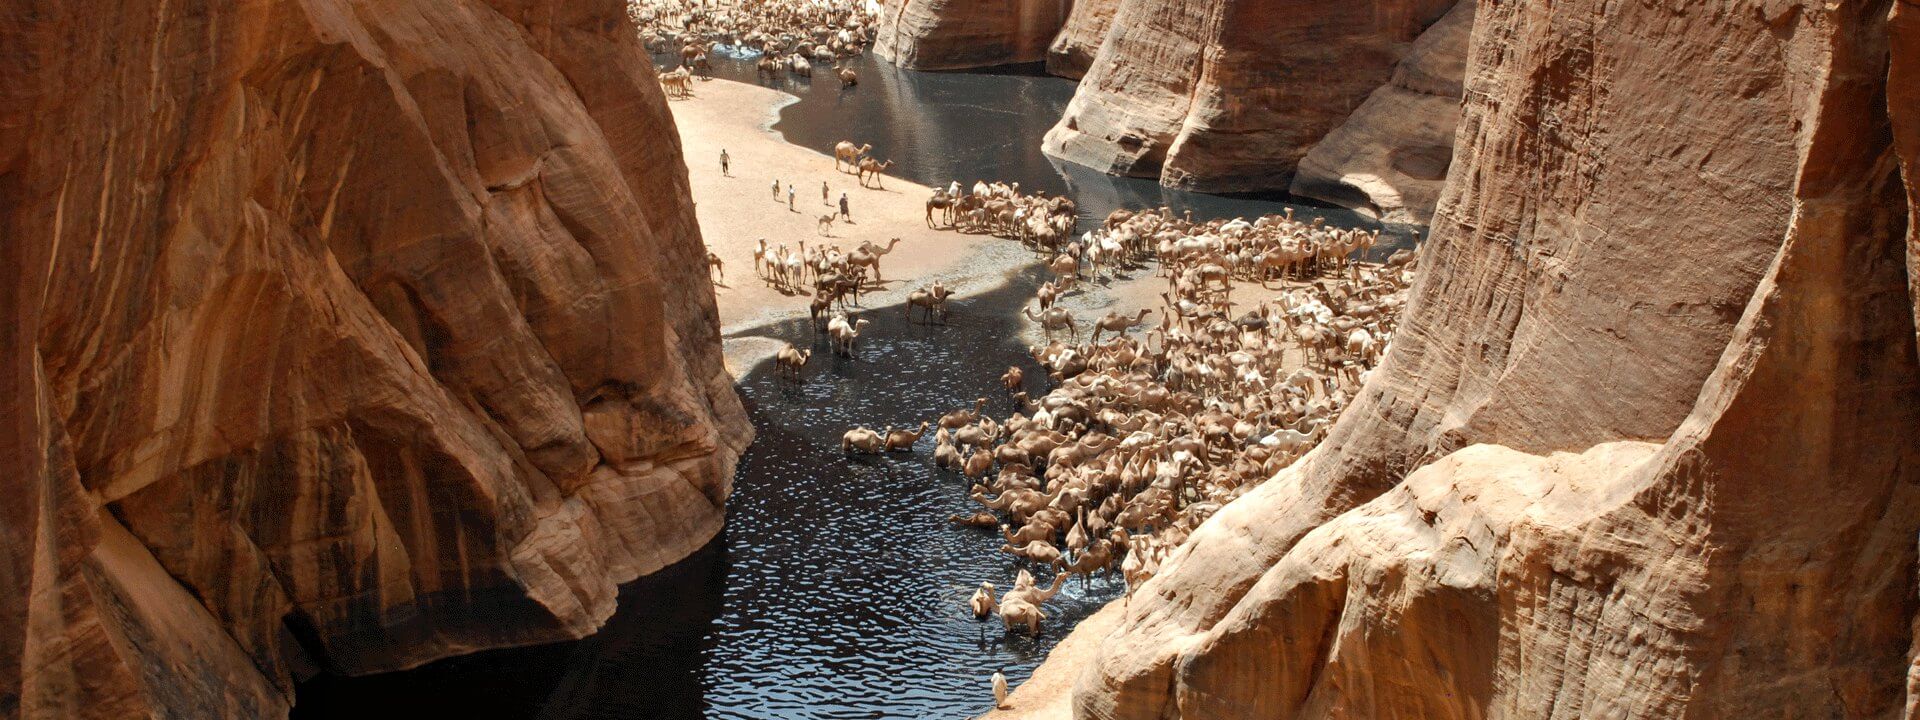 Camels at watering hole - Chad - Great Explorers blog